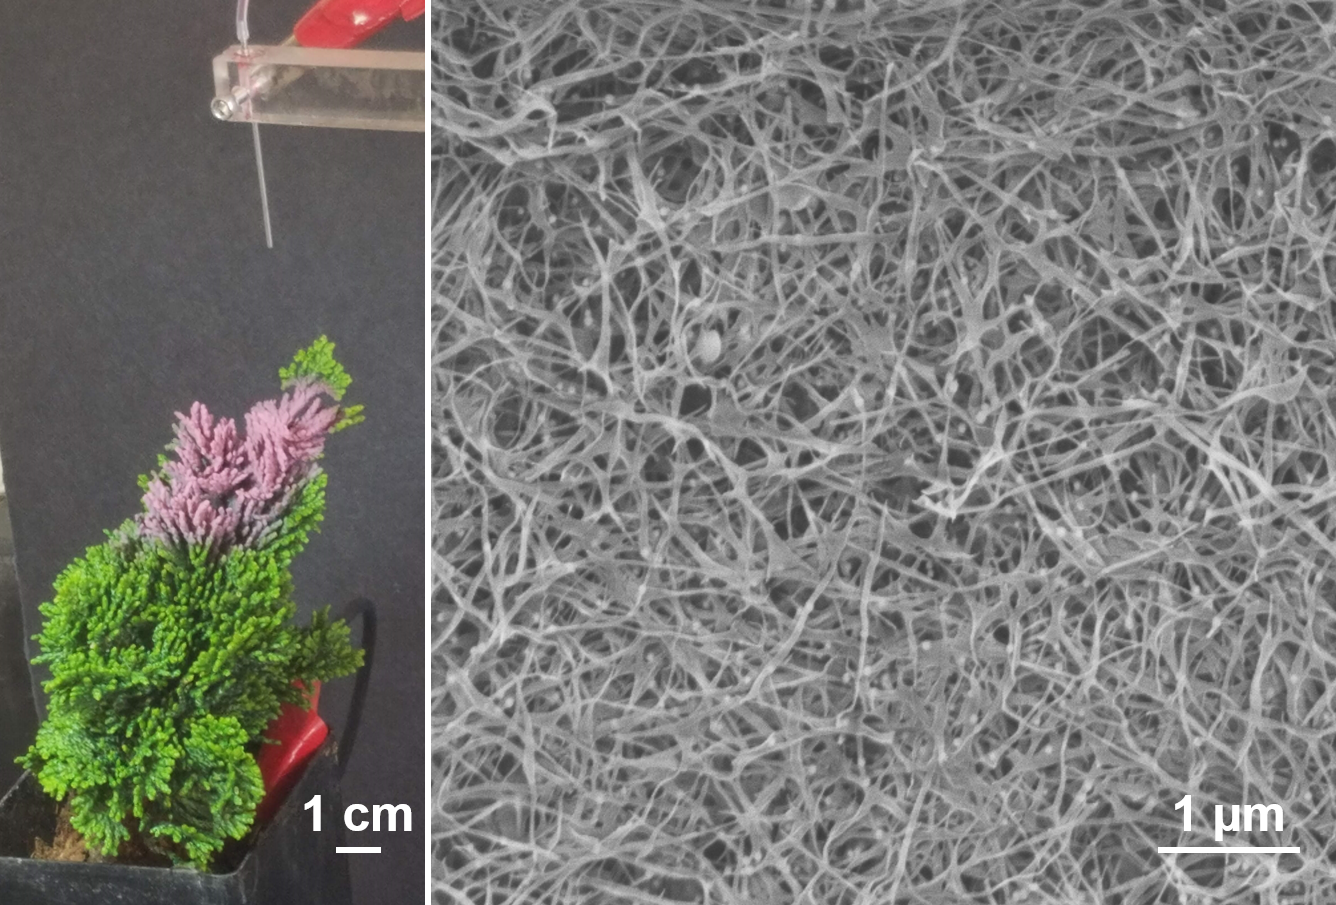 nanowire forest being sprayed on a miniature tree